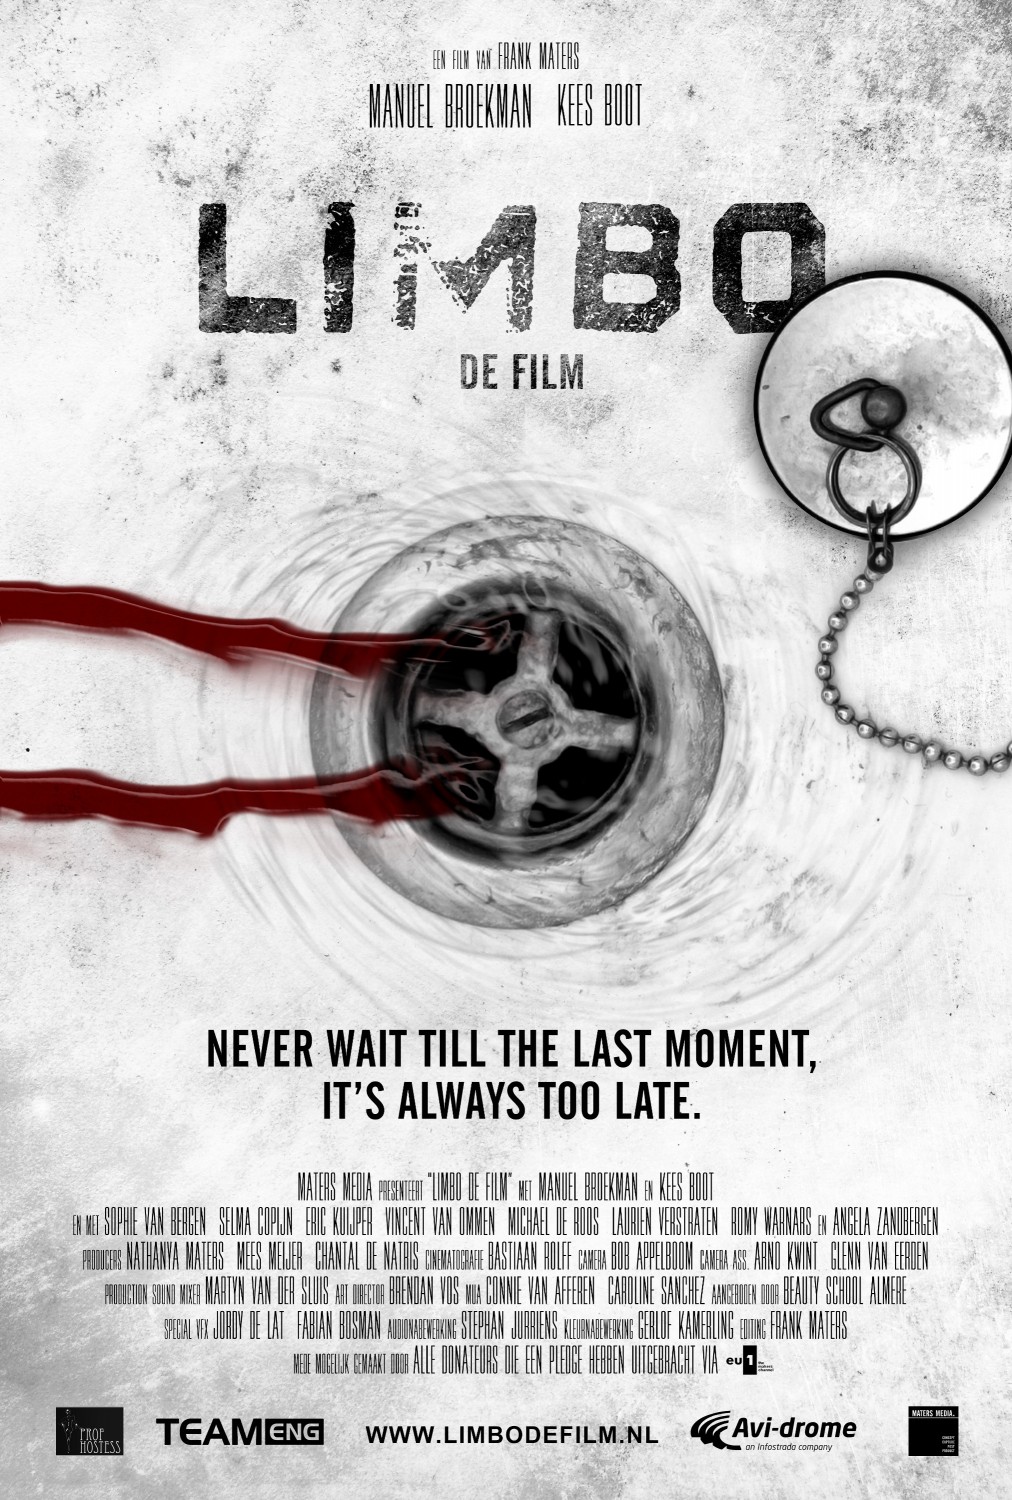 Extra Large Movie Poster Image for Limbo de film